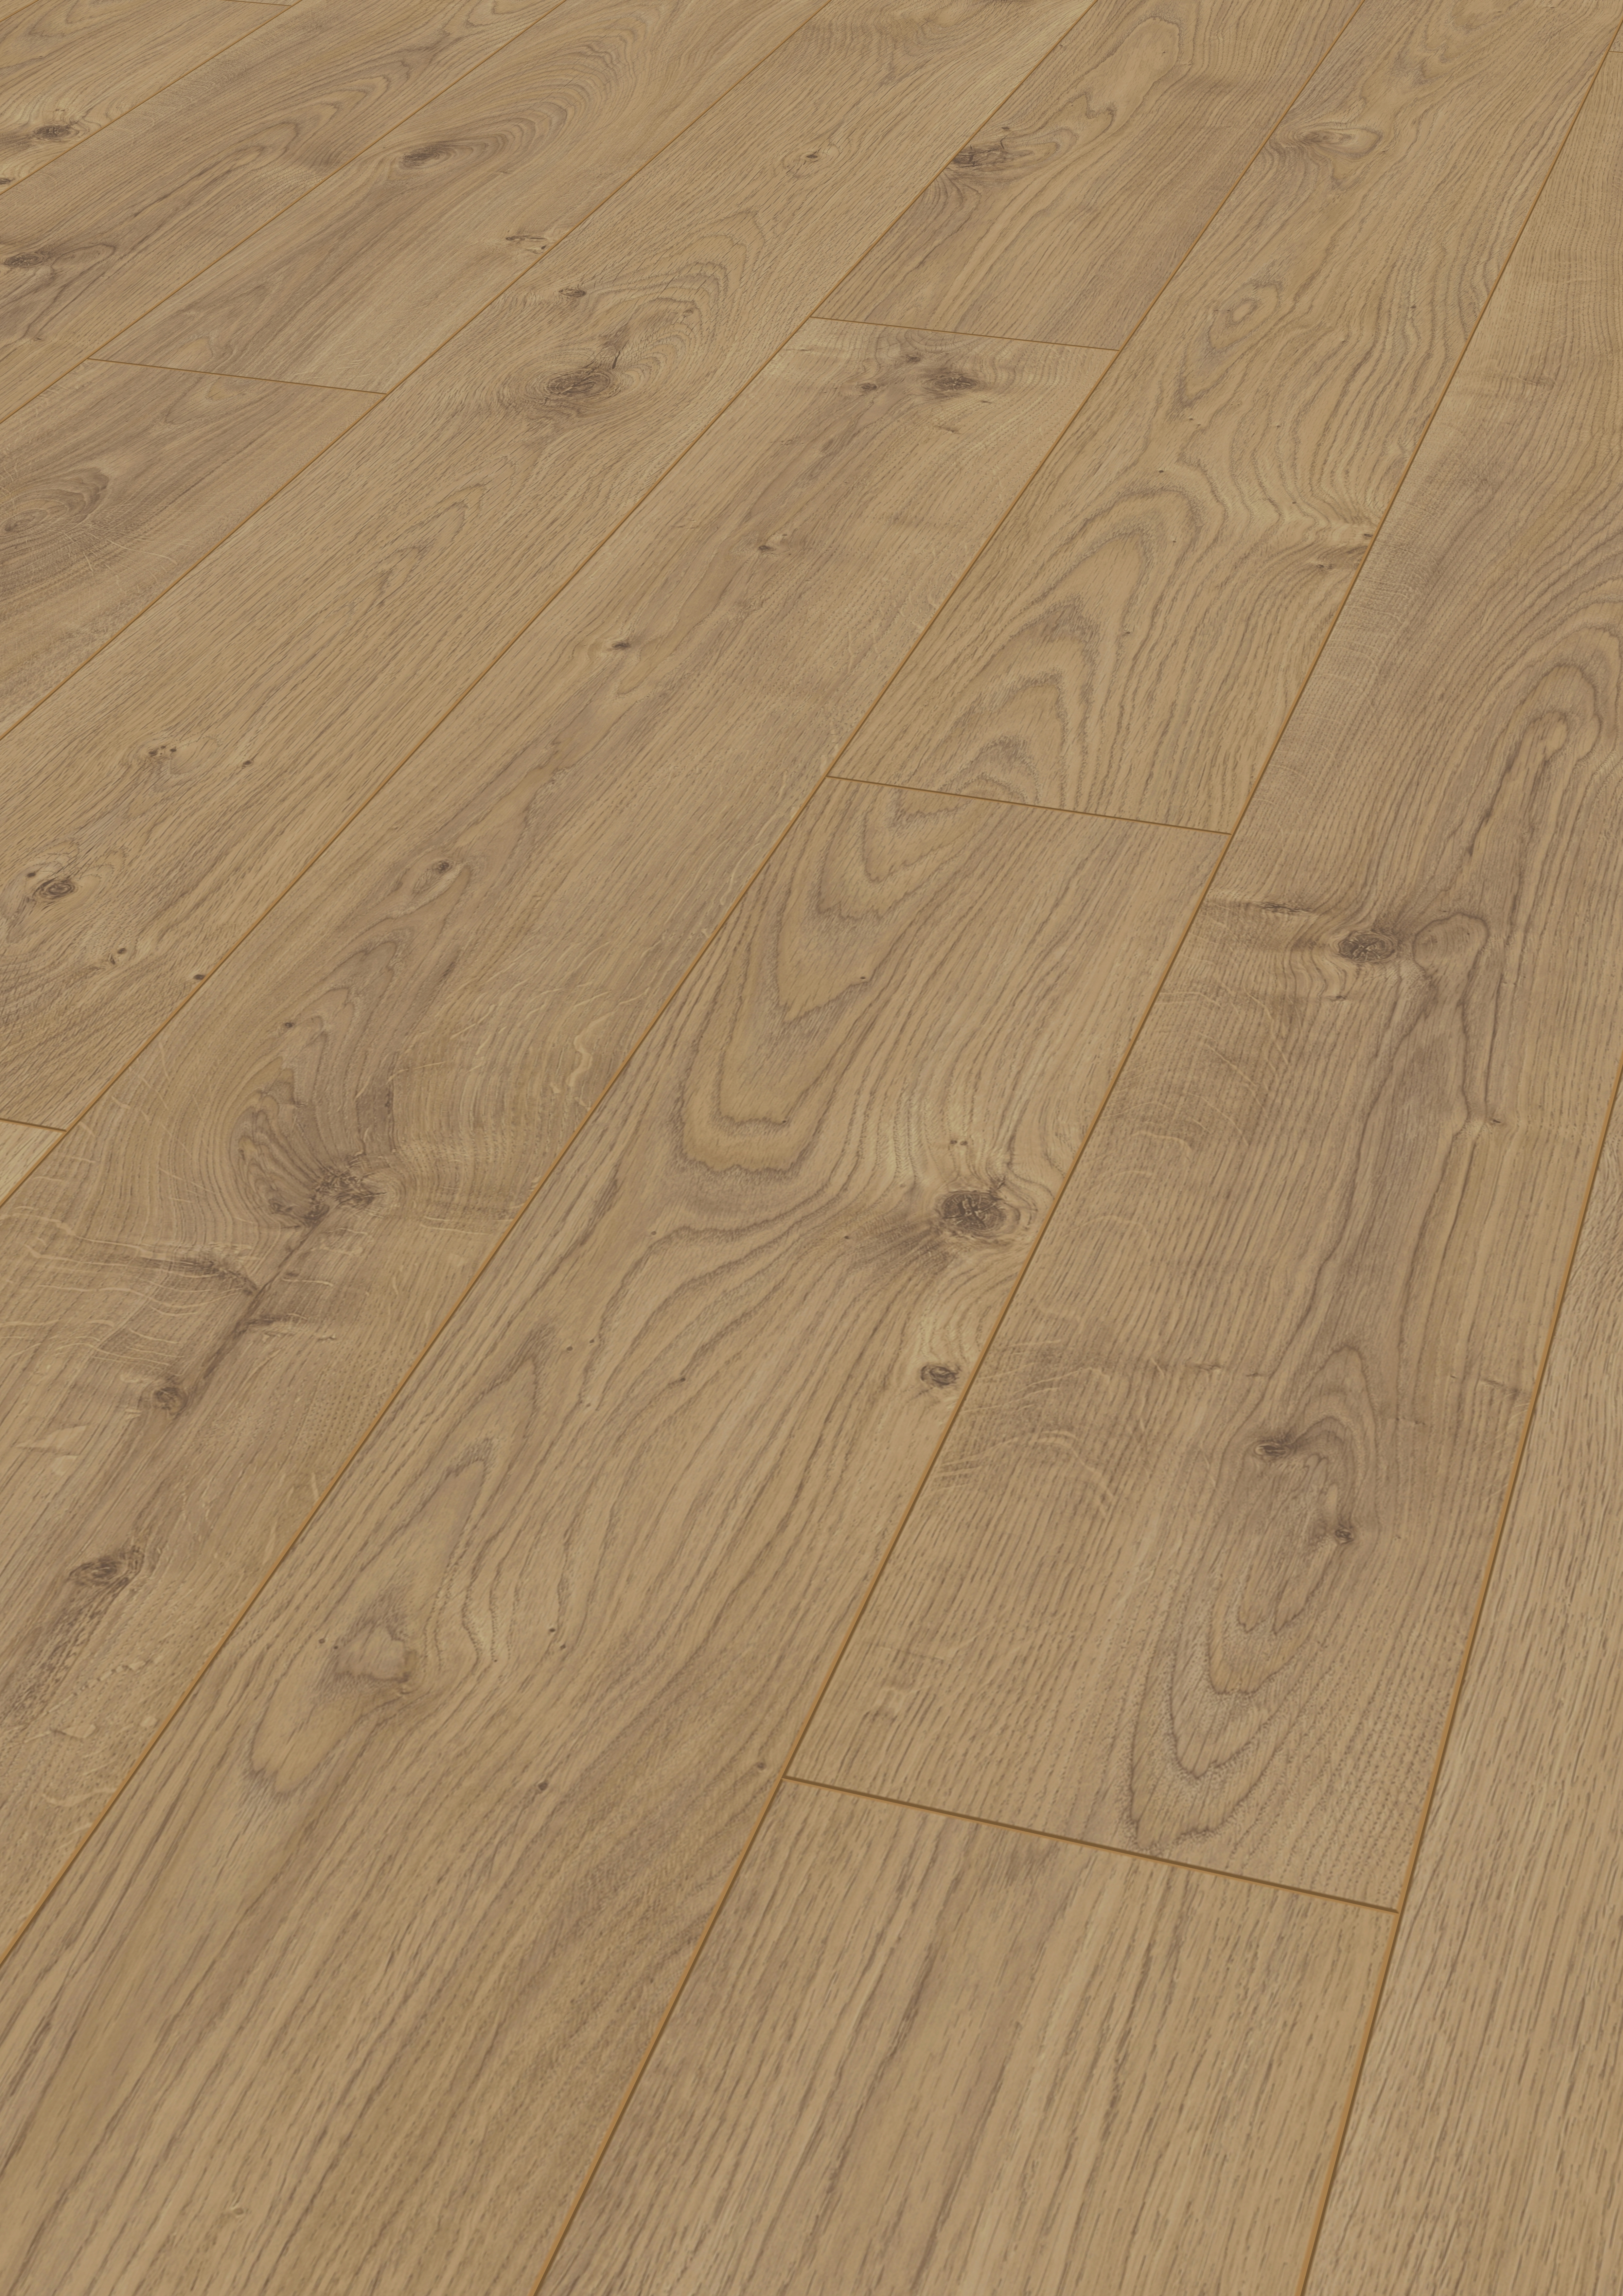 11 Great Bc Hardwood Floor Co Ltd 2022 free download bc hardwood floor co ltd of mammut laminate flooring in country house plank style kronotex with regard to download picture amp